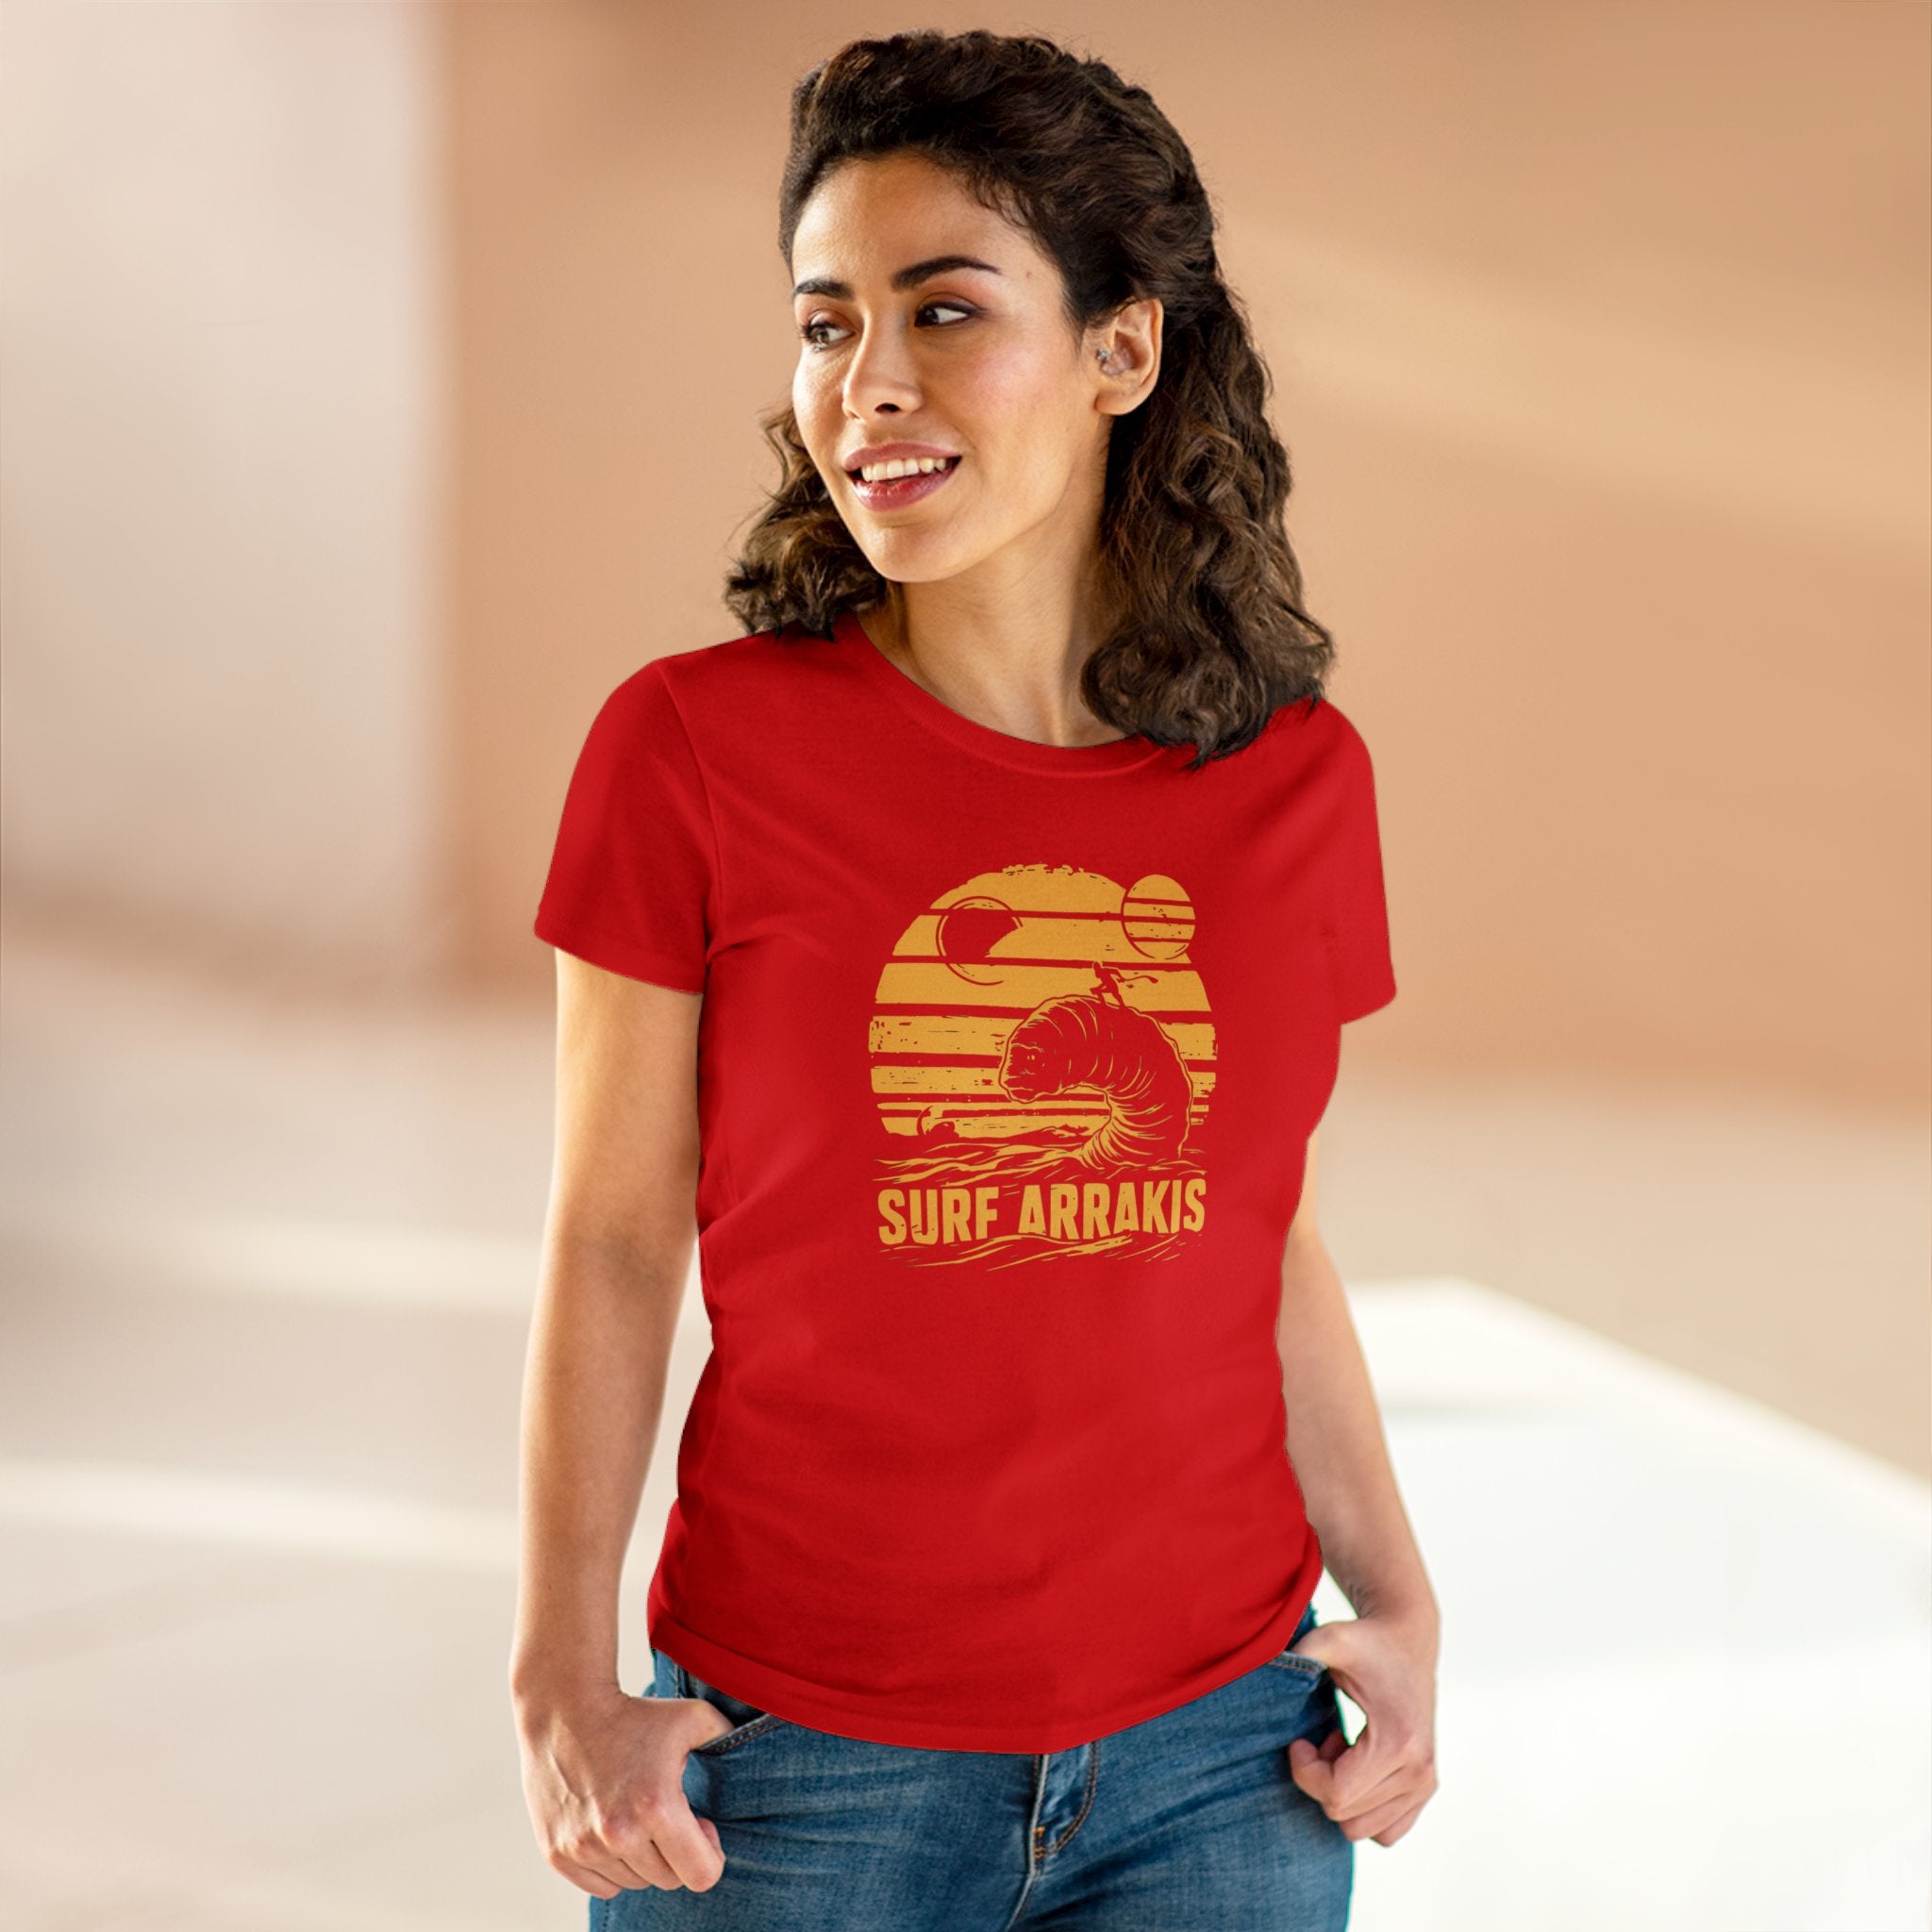 A woman with dark hair stands indoors wearing a red "Surf Arrakis - Women's Tee" made from soft light cotton and blue jeans against a blurred background.